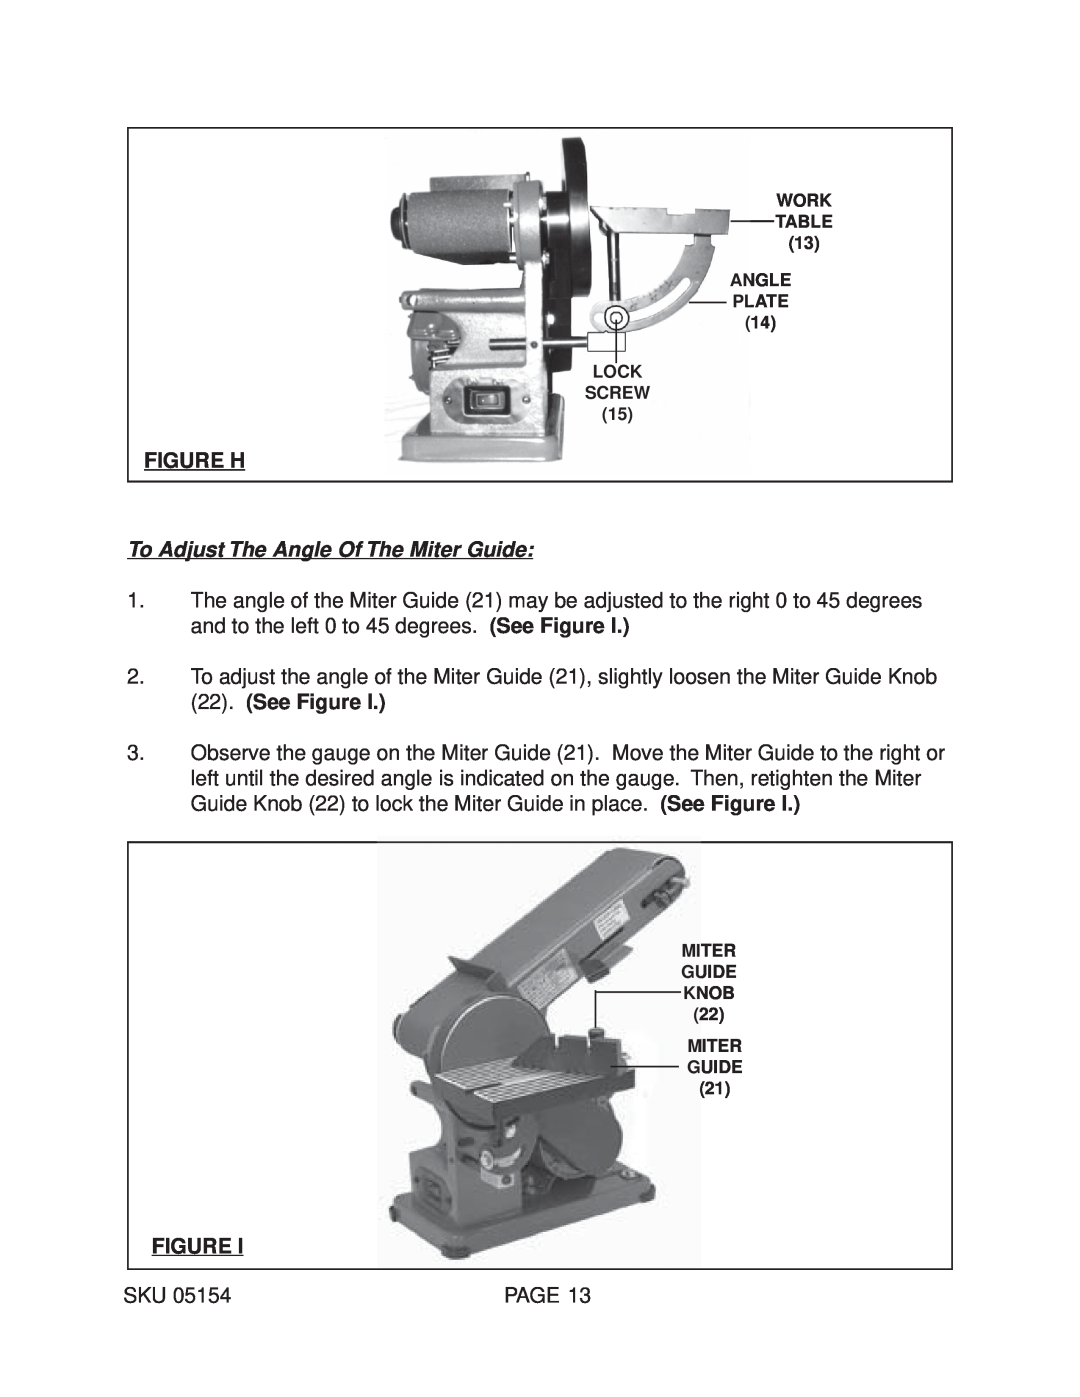 Harbor Freight Tools 05154 operating instructions Figure H, To Adjust The Angle Of The Miter Guide 